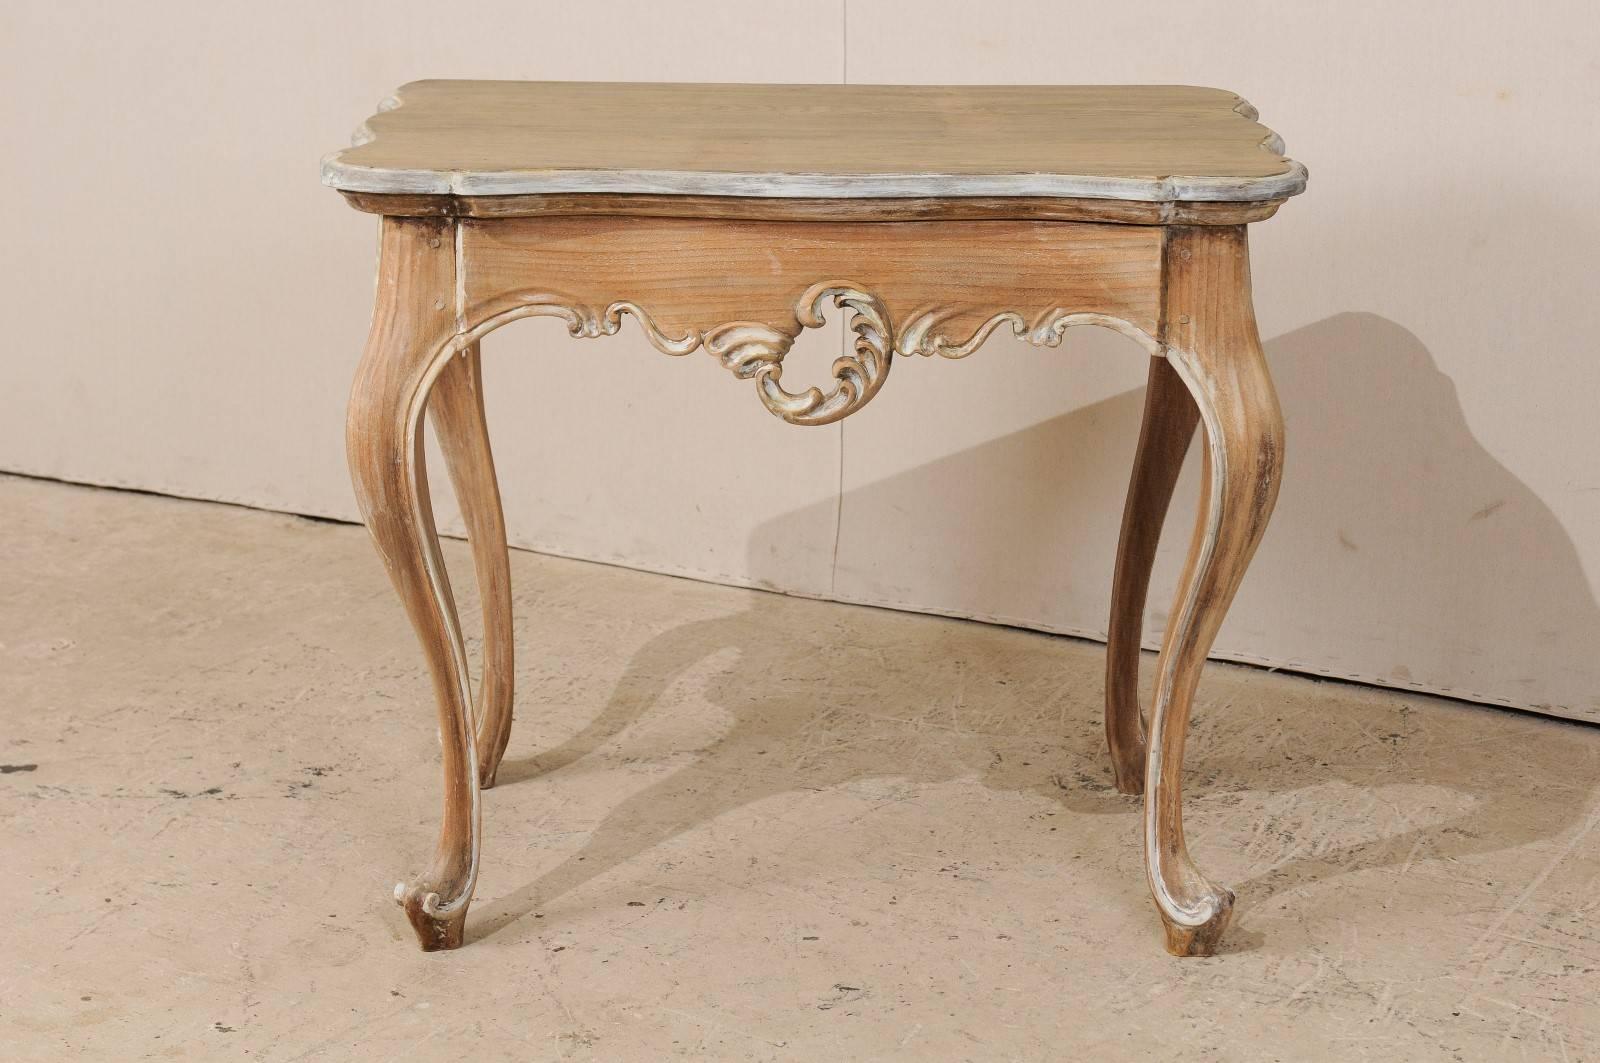 Carved Lovely Brazilian Accent Table of Natural Wood with Painted Trim & Cabriole Legs